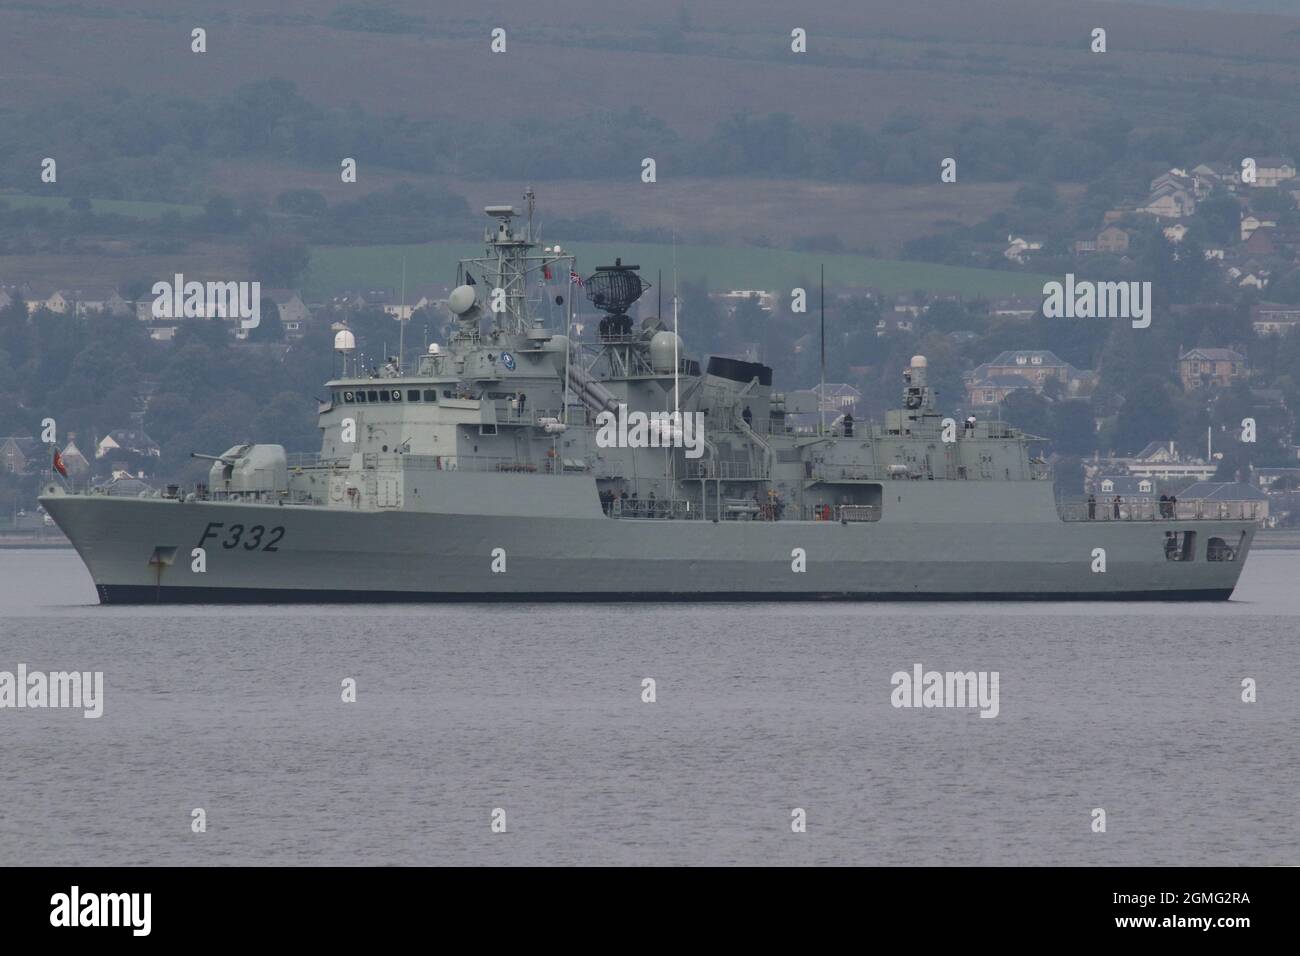 NRP Corte-Real (F332), a Vasco da Gama-class frigate operated by the  Portuguese Navy, off Greenock prior to participating in the military  exercises Dynamic Mariner 2021 and Joint Warrior 21-2 Stock Photo -